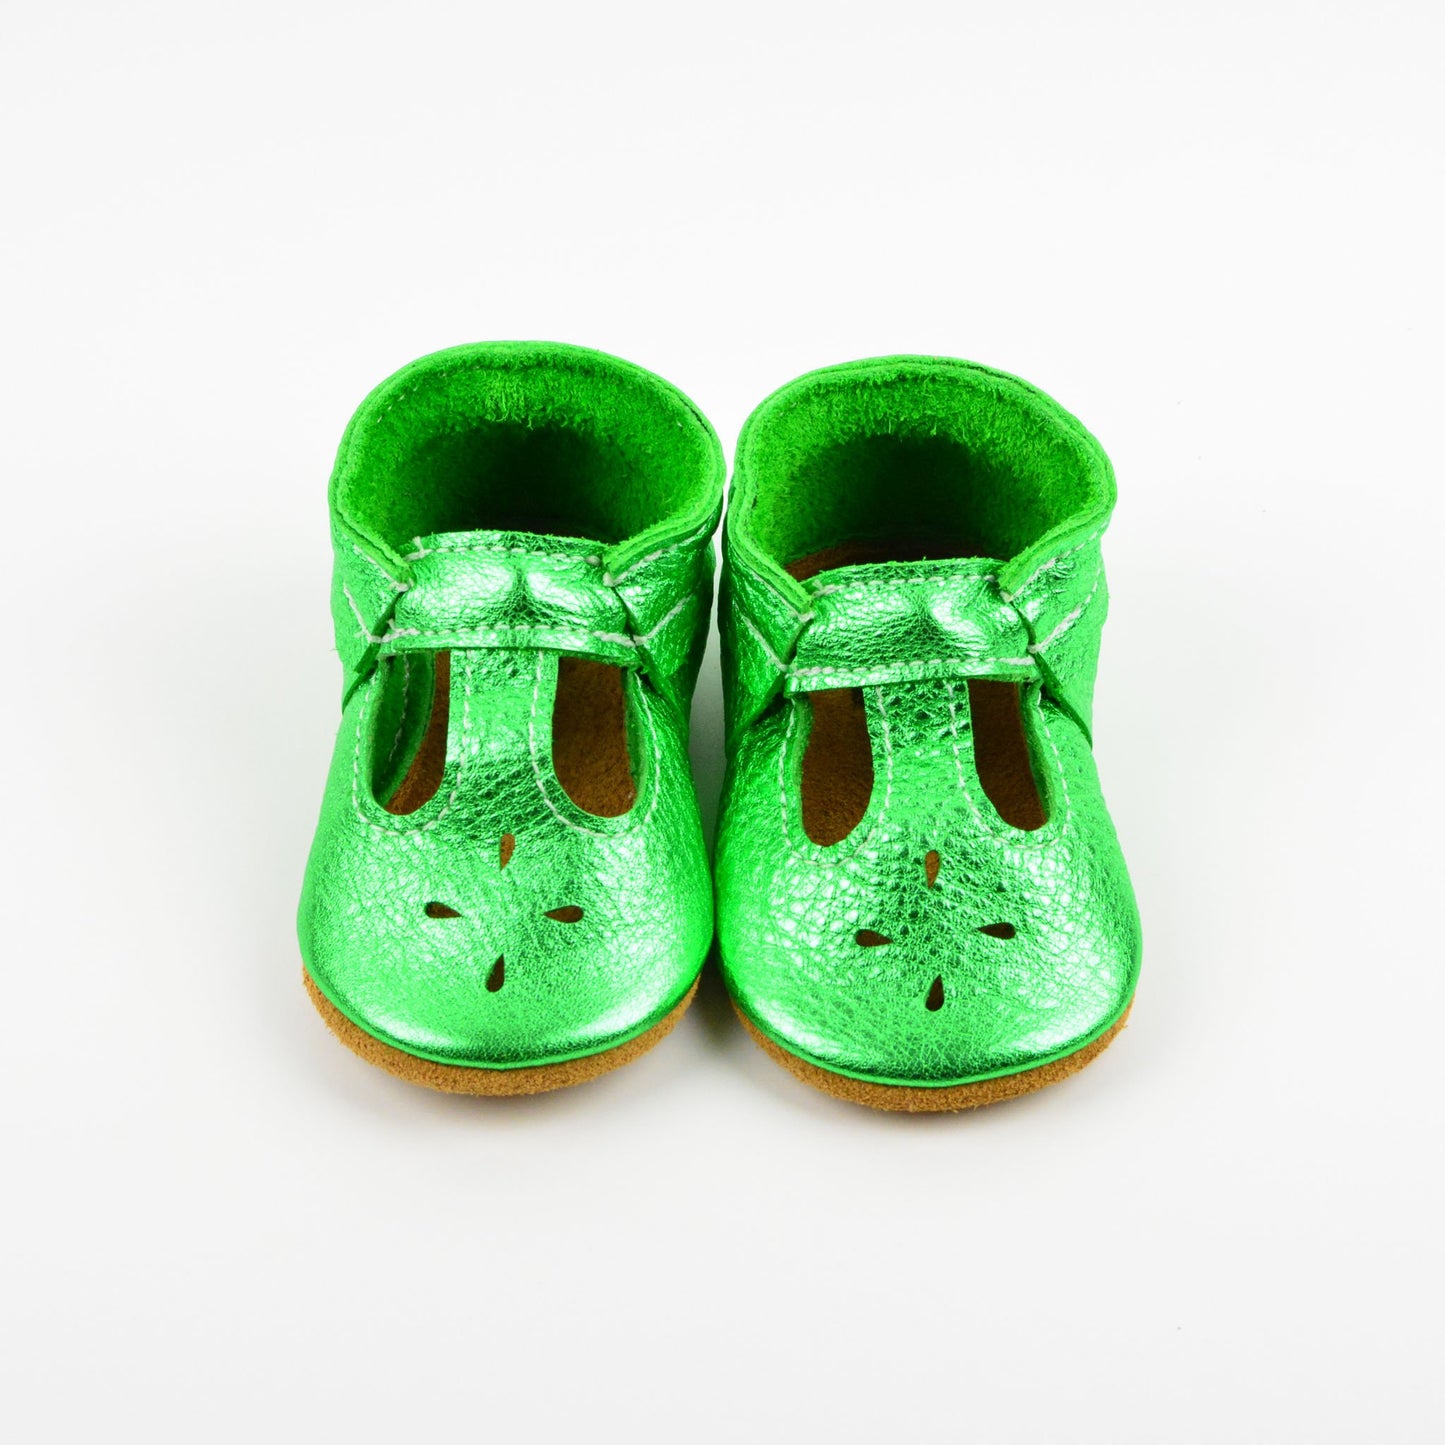 RTS Christmas Green T-straps With Tan Suede Leather Soles - Size 3 (12-18M)(5")